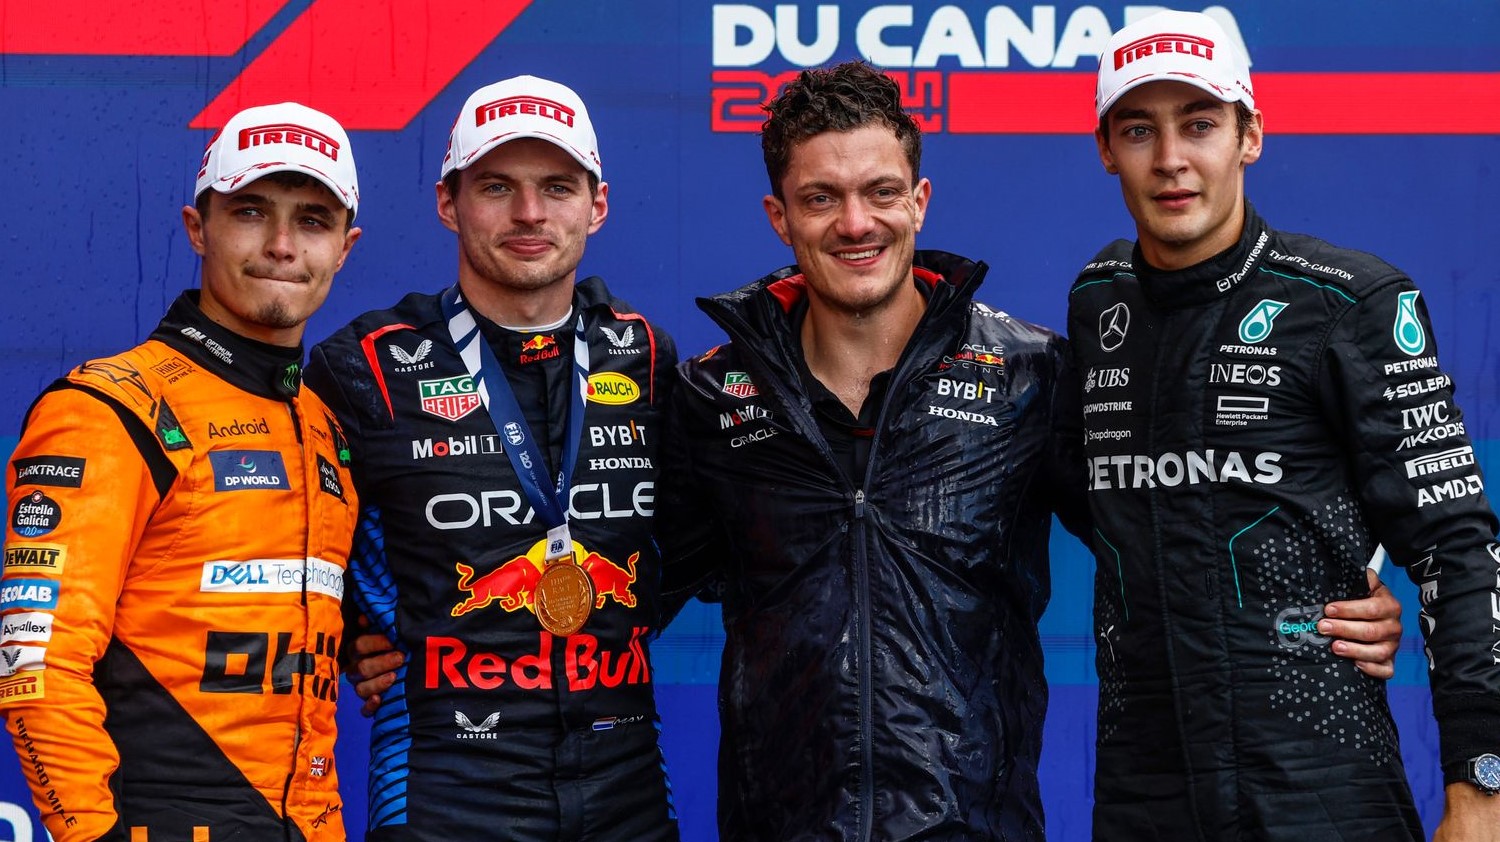 Max Verstappen wins wet and chaotic Canadian Grand Prix